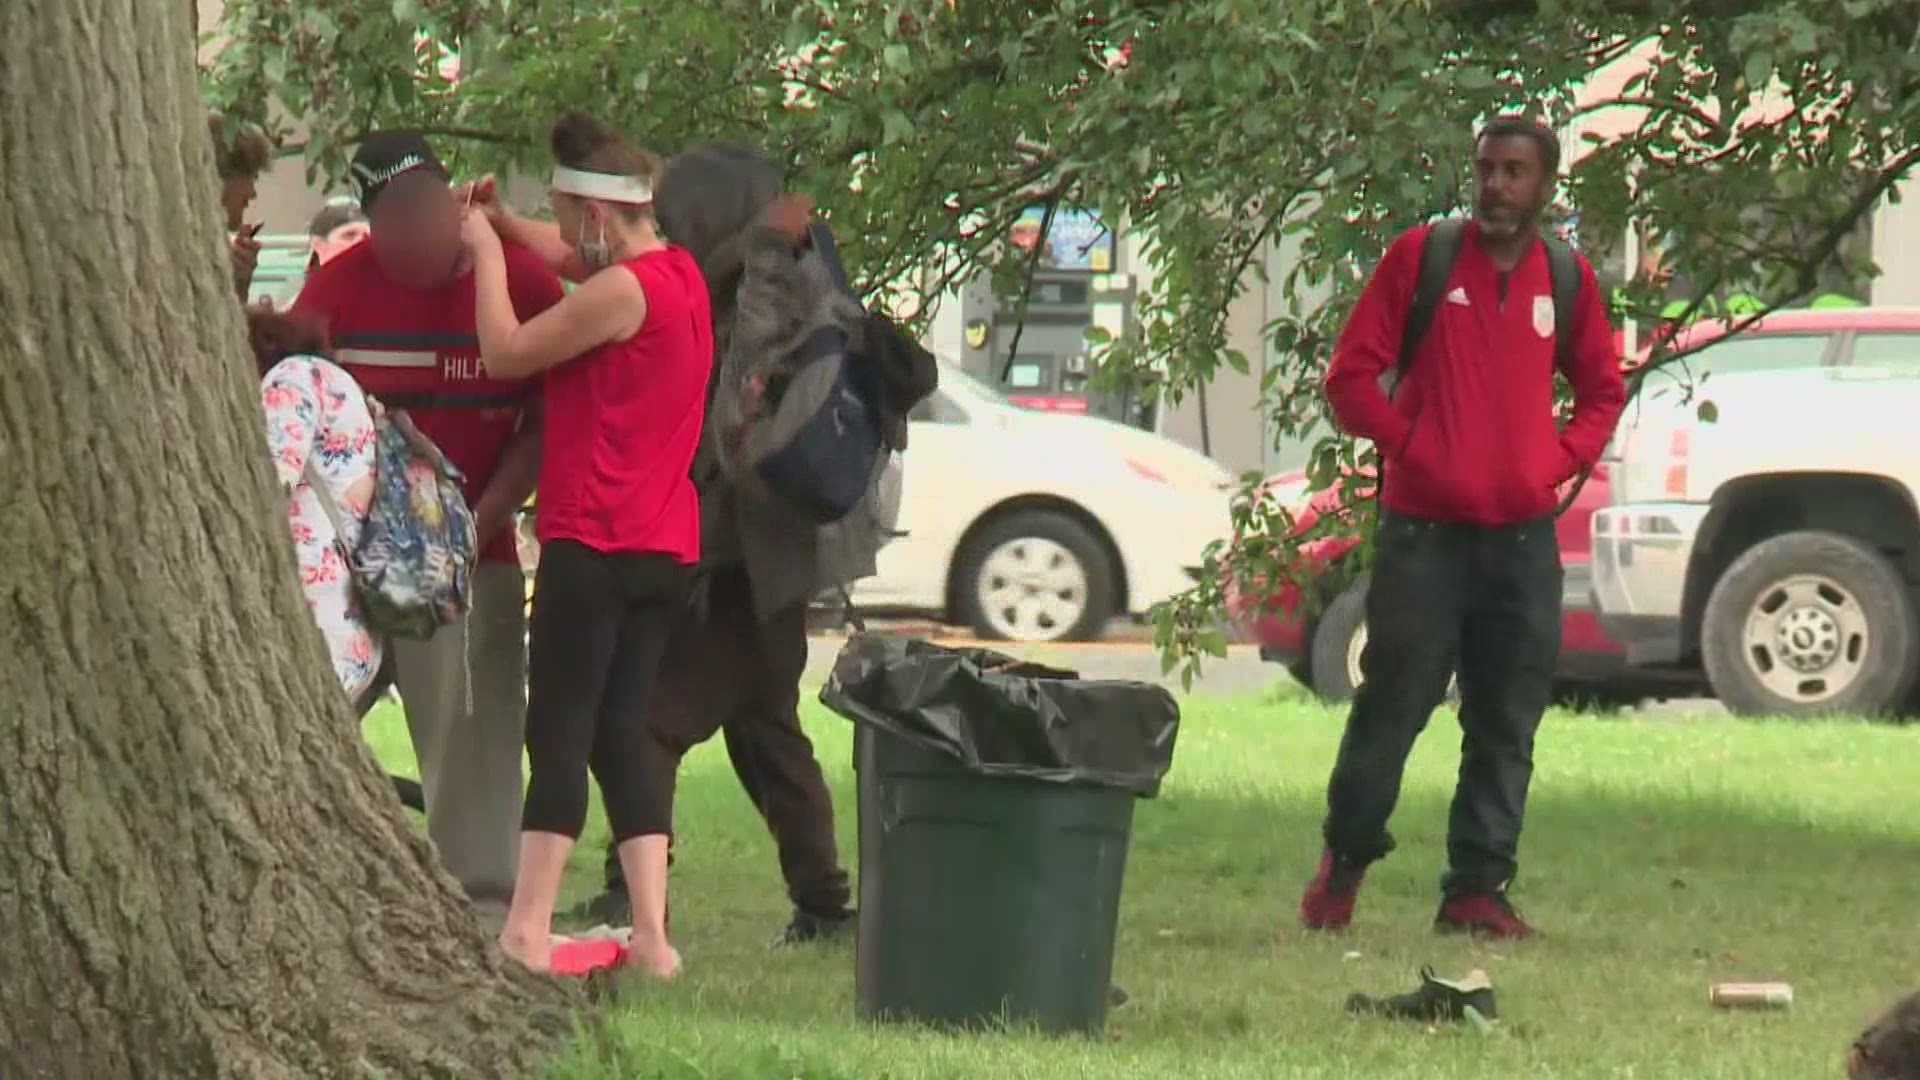 Portland hears complaints about trash, needles and crowds of people camped out in Deering Oaks